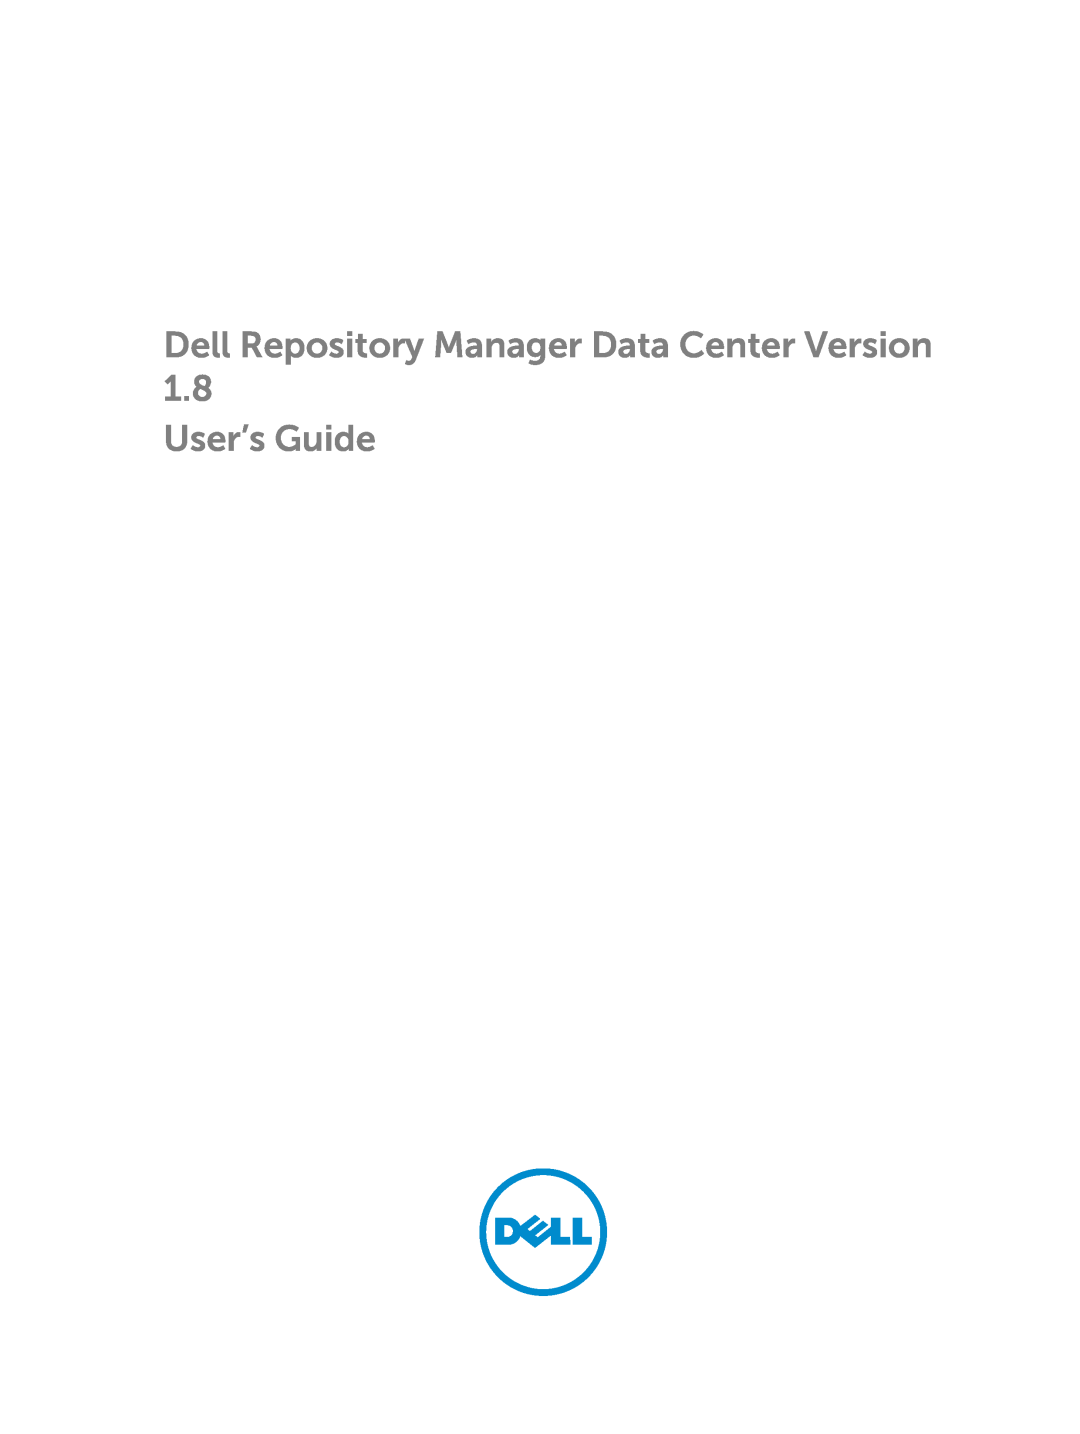 Dell 1.8 manual Dell Repository Manager Data Center Version, User’s Guide 